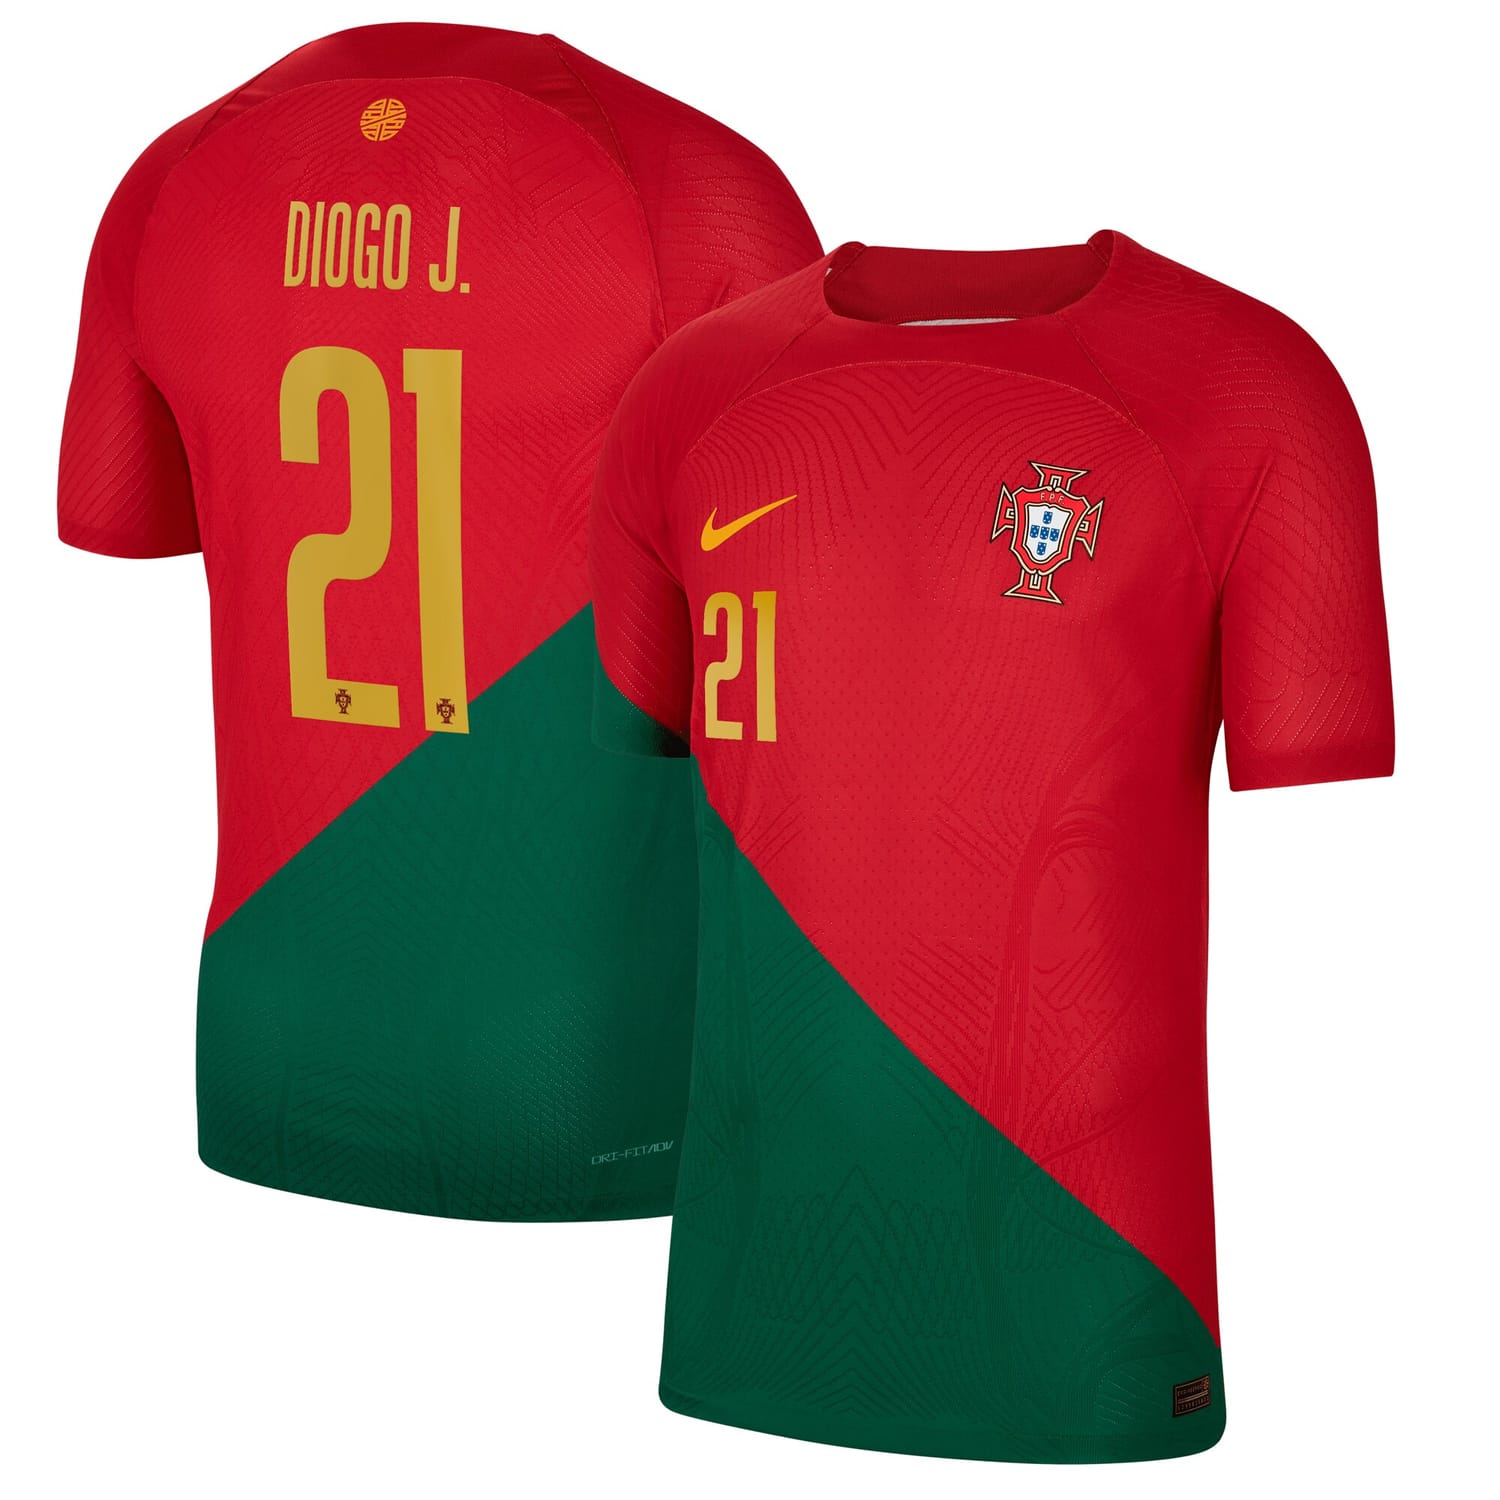 Portugal National Team Home Authentic Jersey Shirt Red 2022-23 player Diogo Jota printing for Men